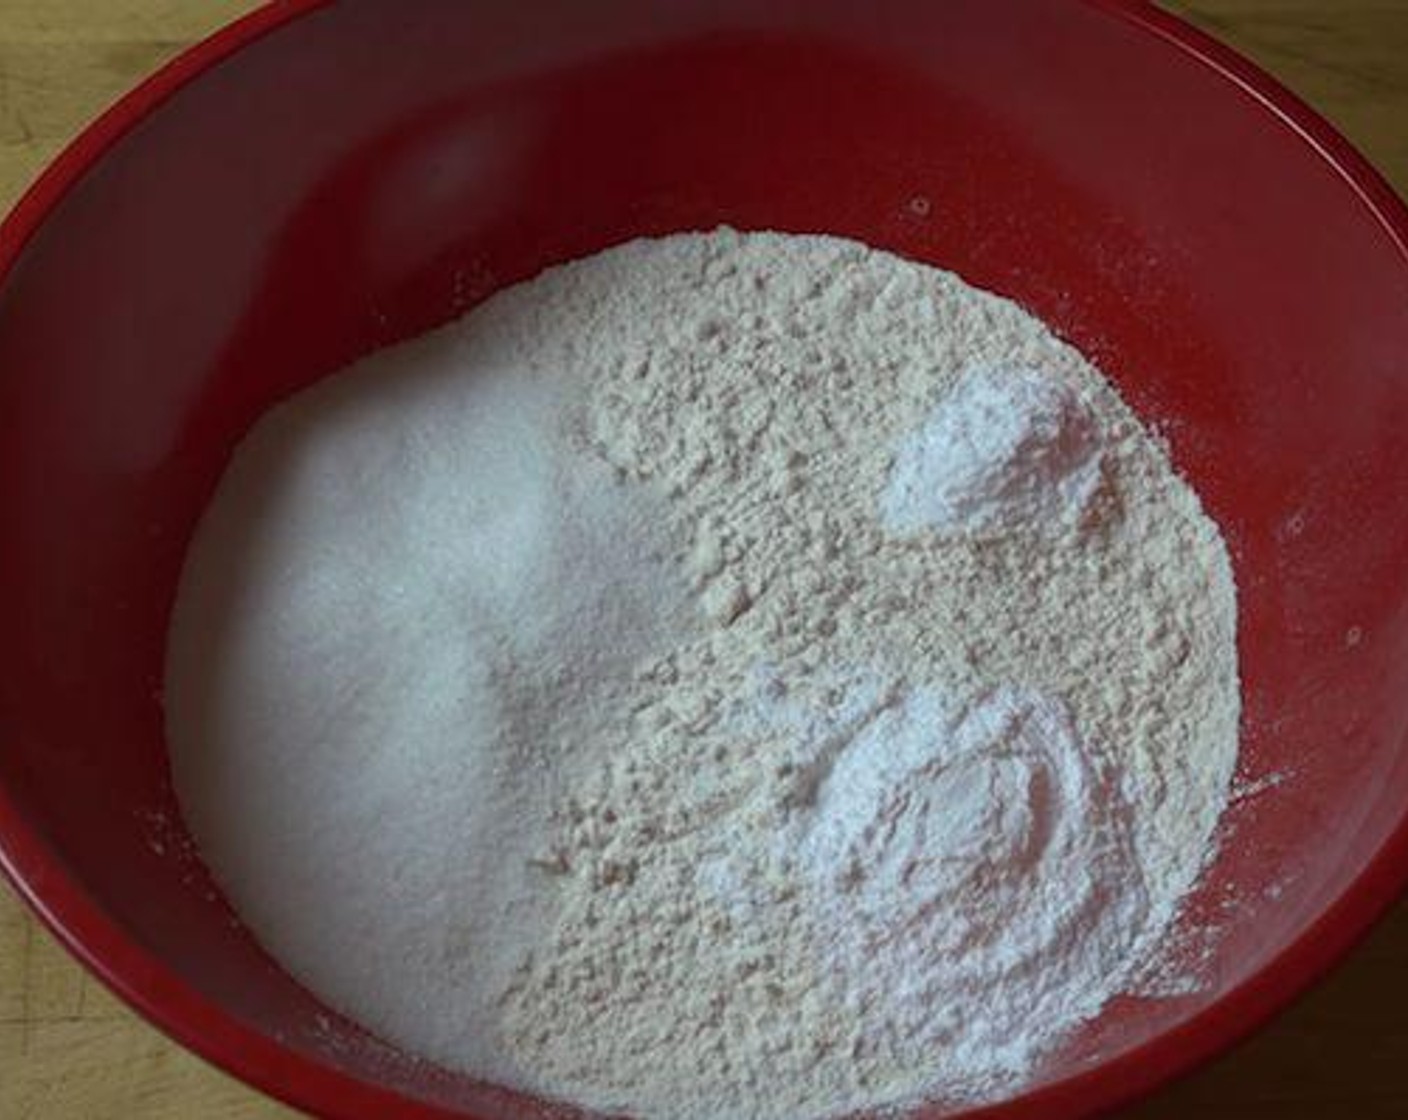 step 1 Into a big mixing bowl add All-Purpose Flour (4 cups), Granulated Sugar (1/2 cup), Baking Powder (1 Tbsp) and Baking Soda (1/2 Tbsp). Using a wooden spoon mixed until all combined.